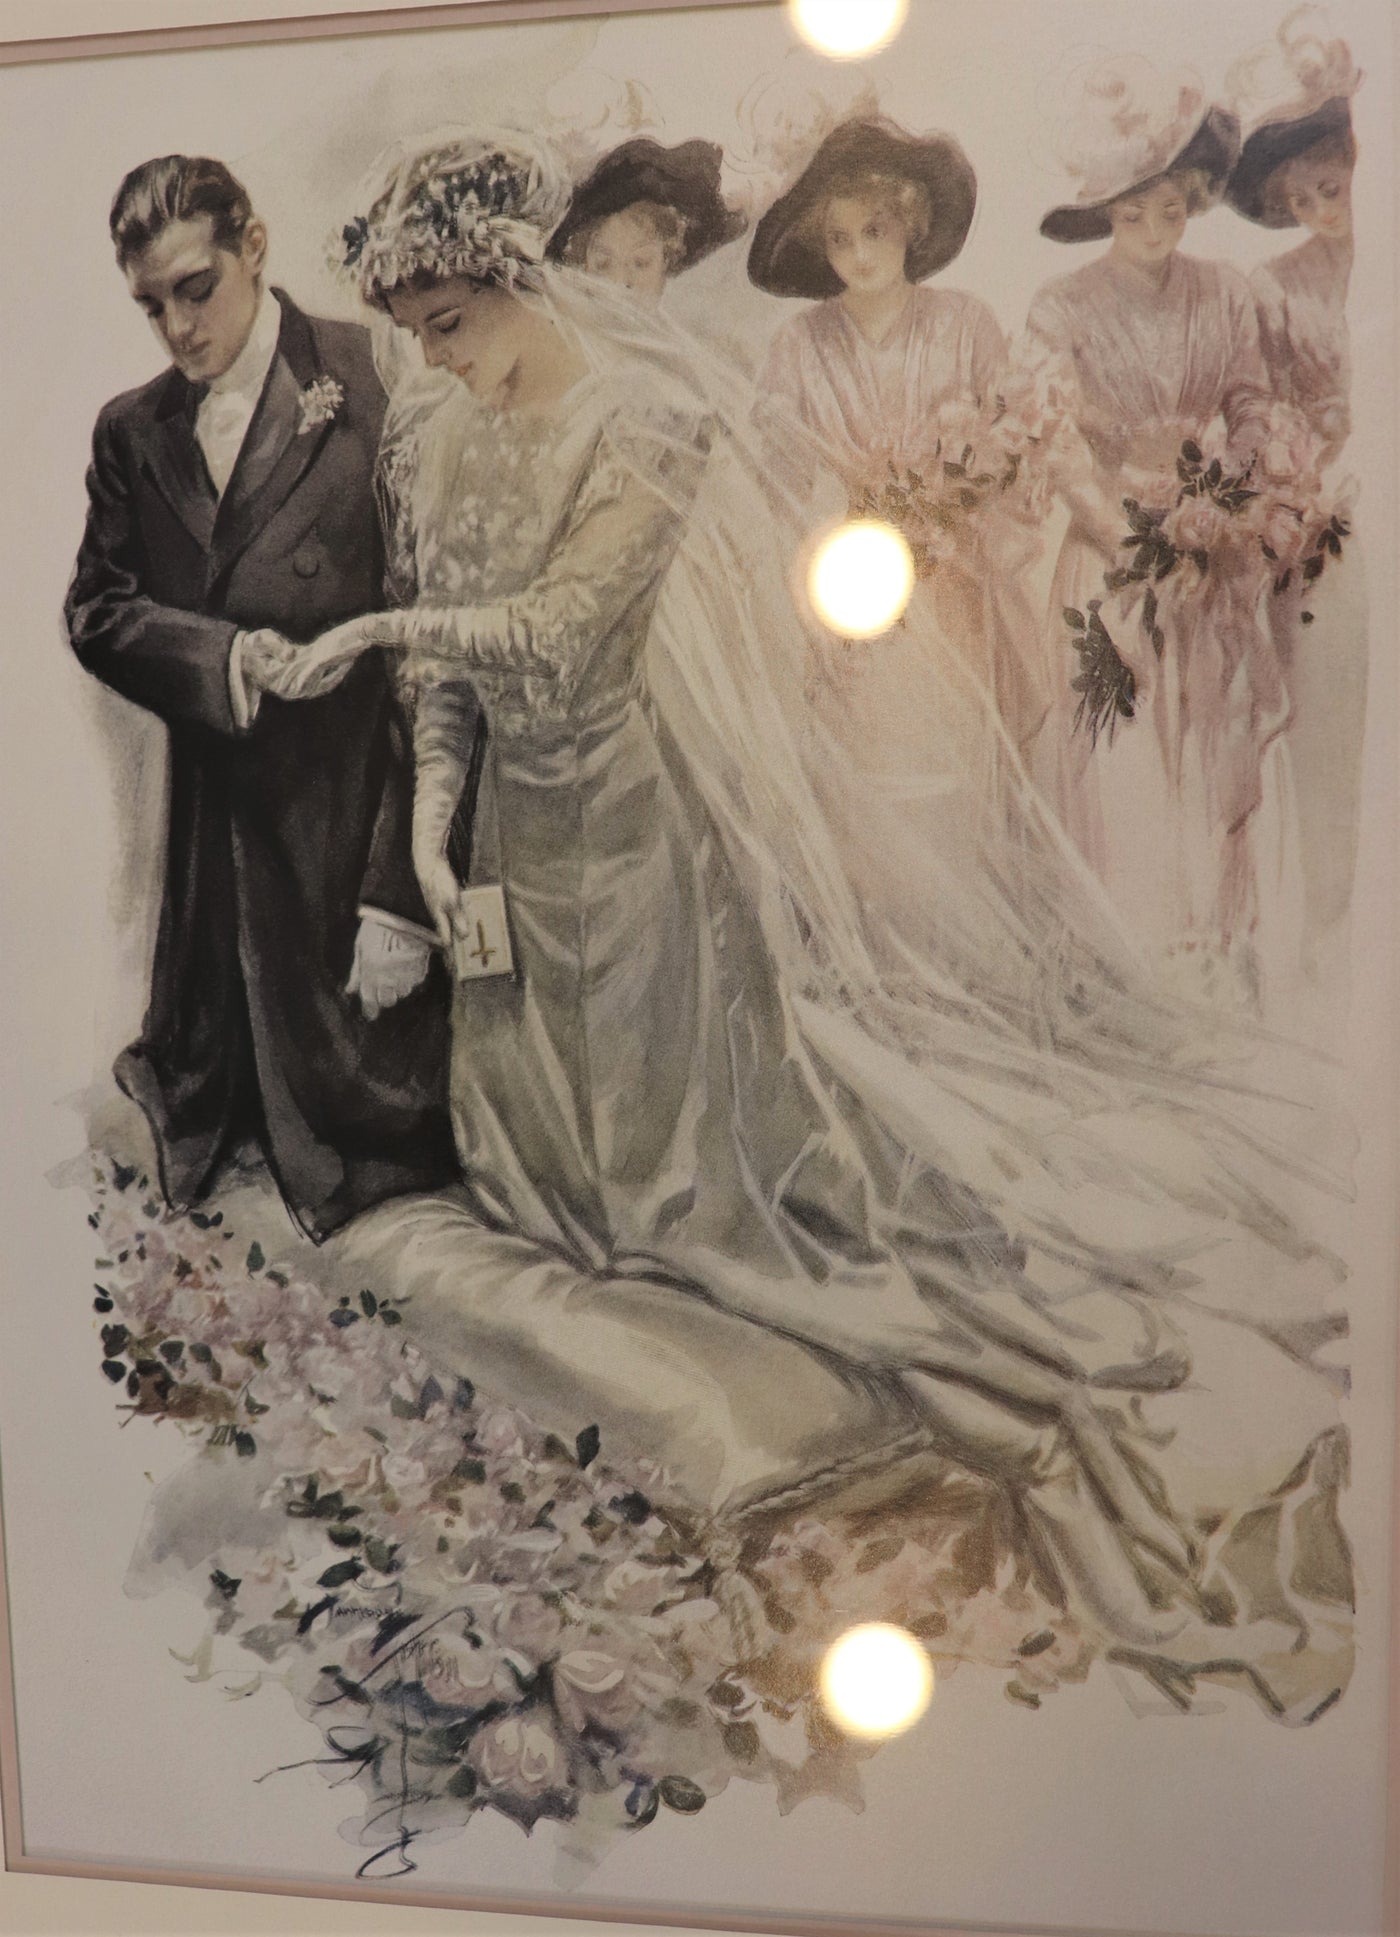 The Wedding- Painting Signed by Artist